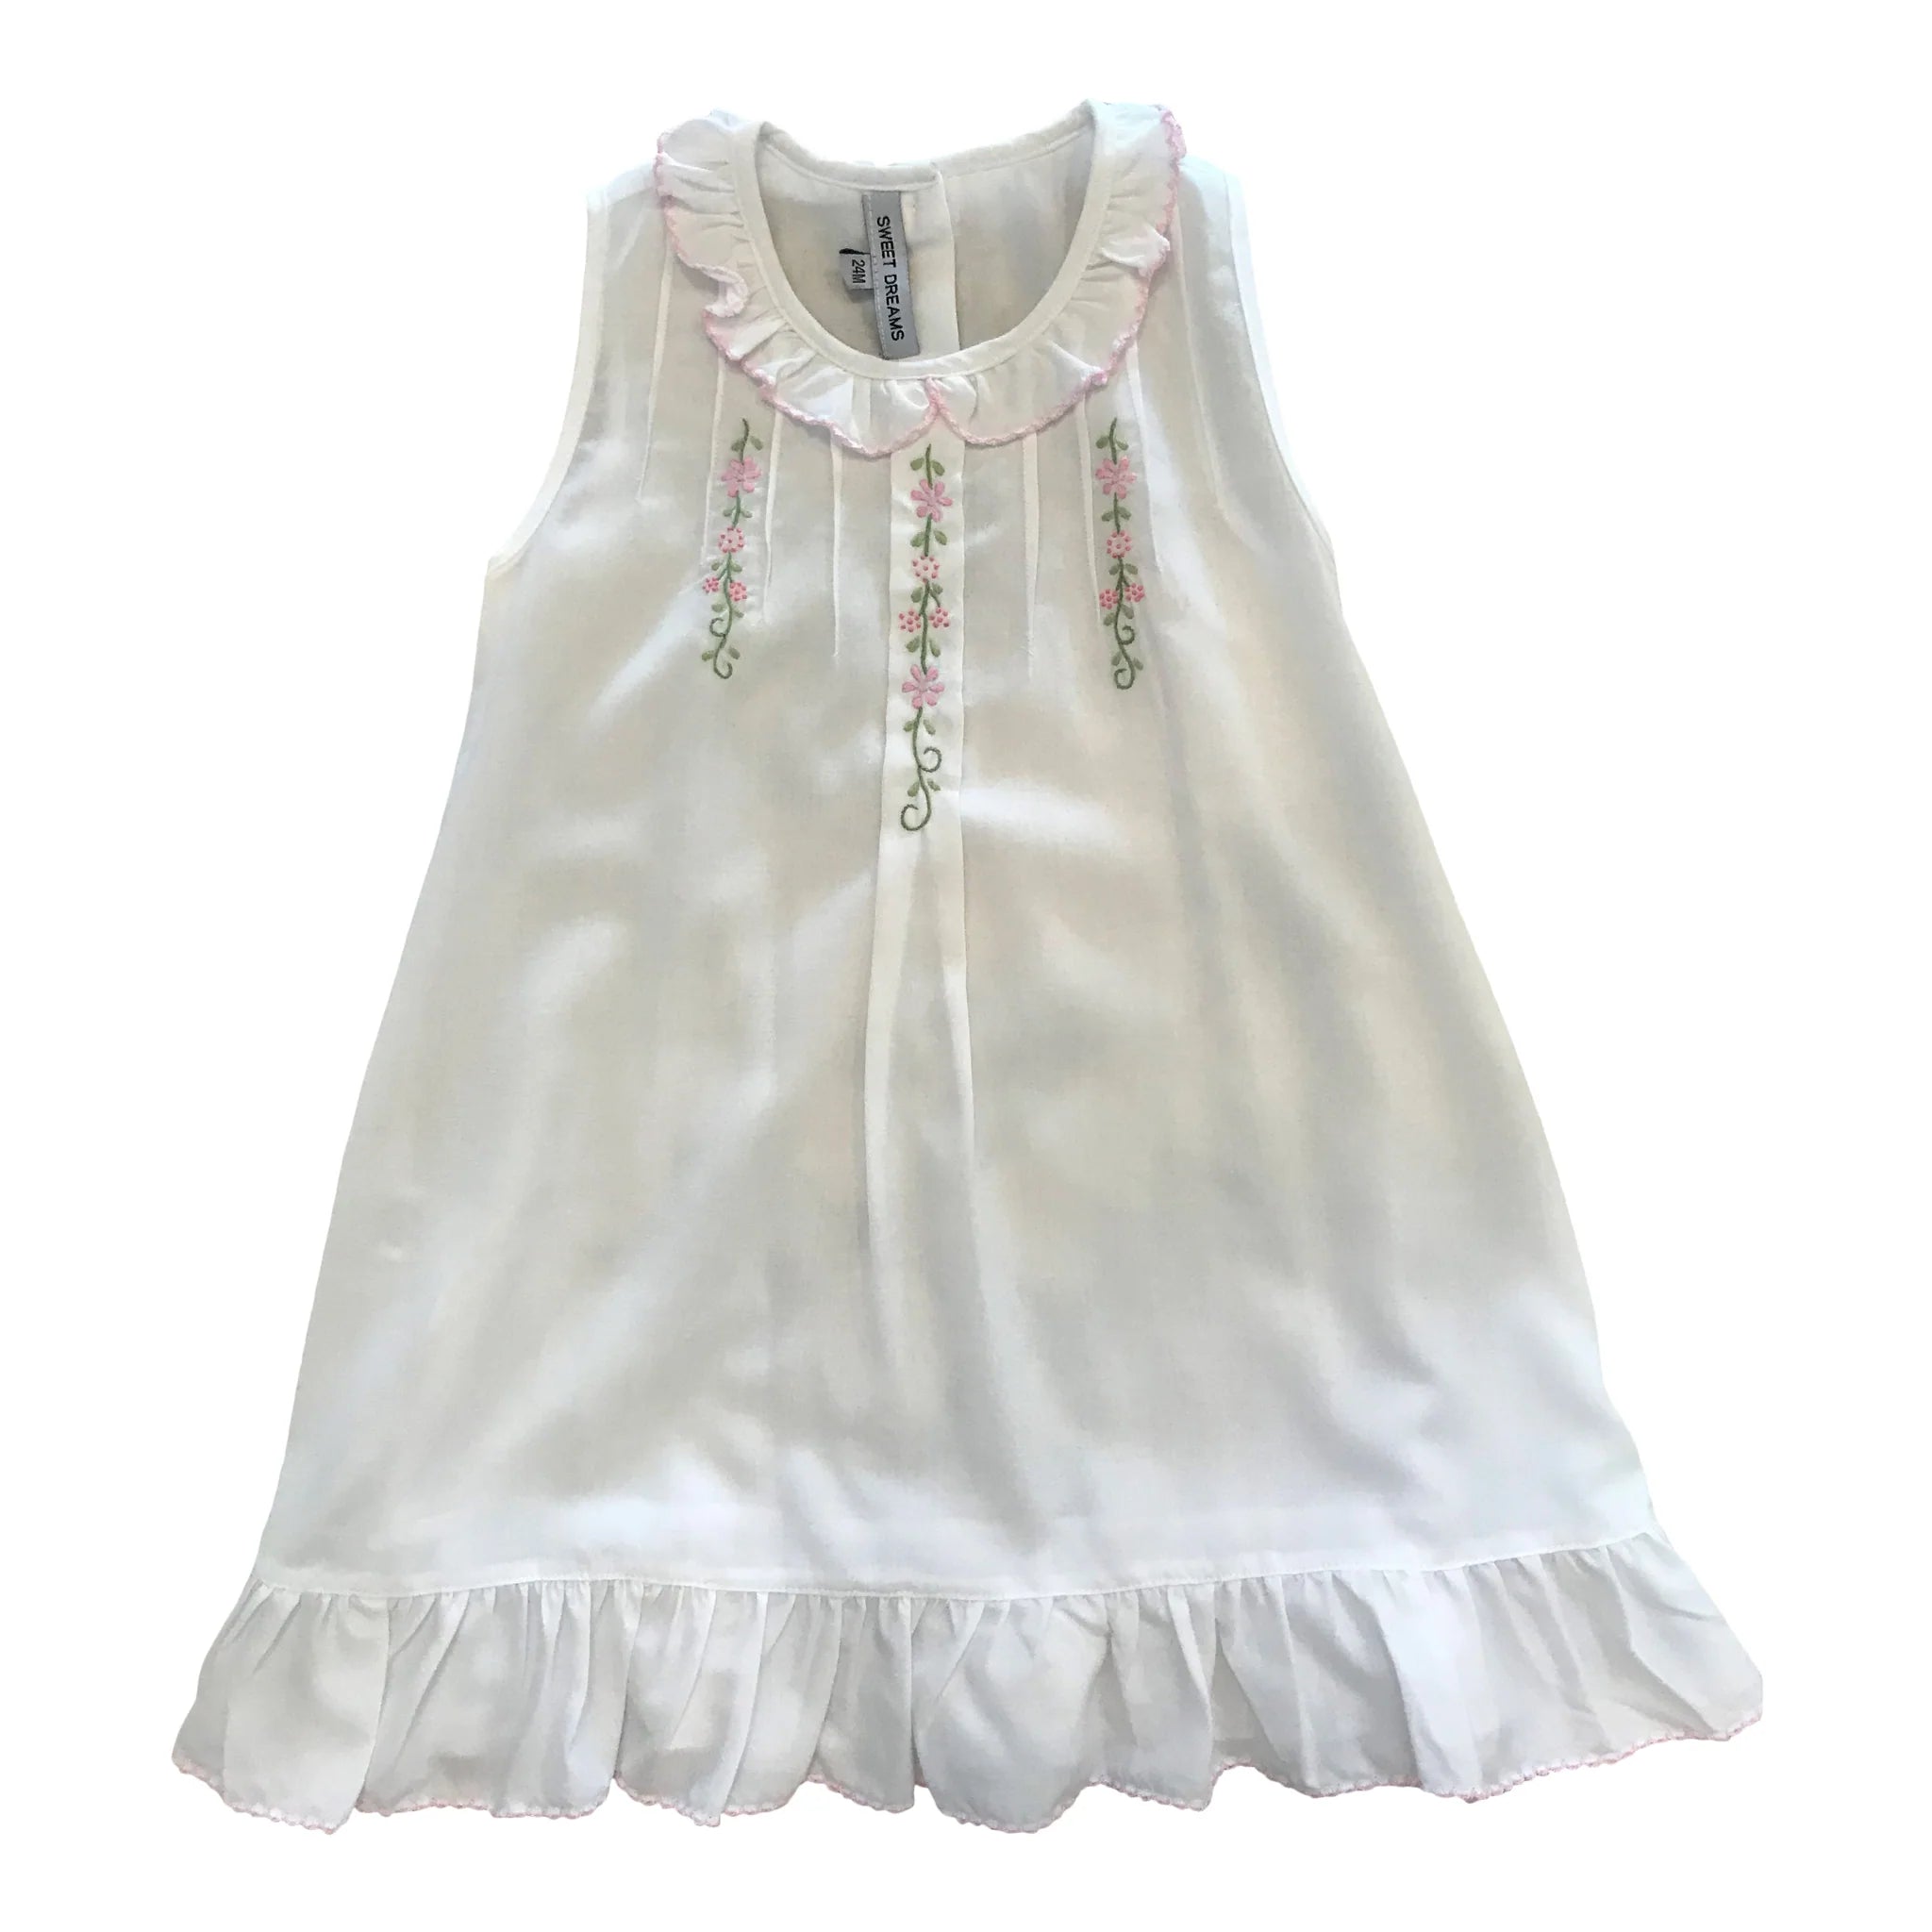 White Nightgown w/ Floral Embroidery